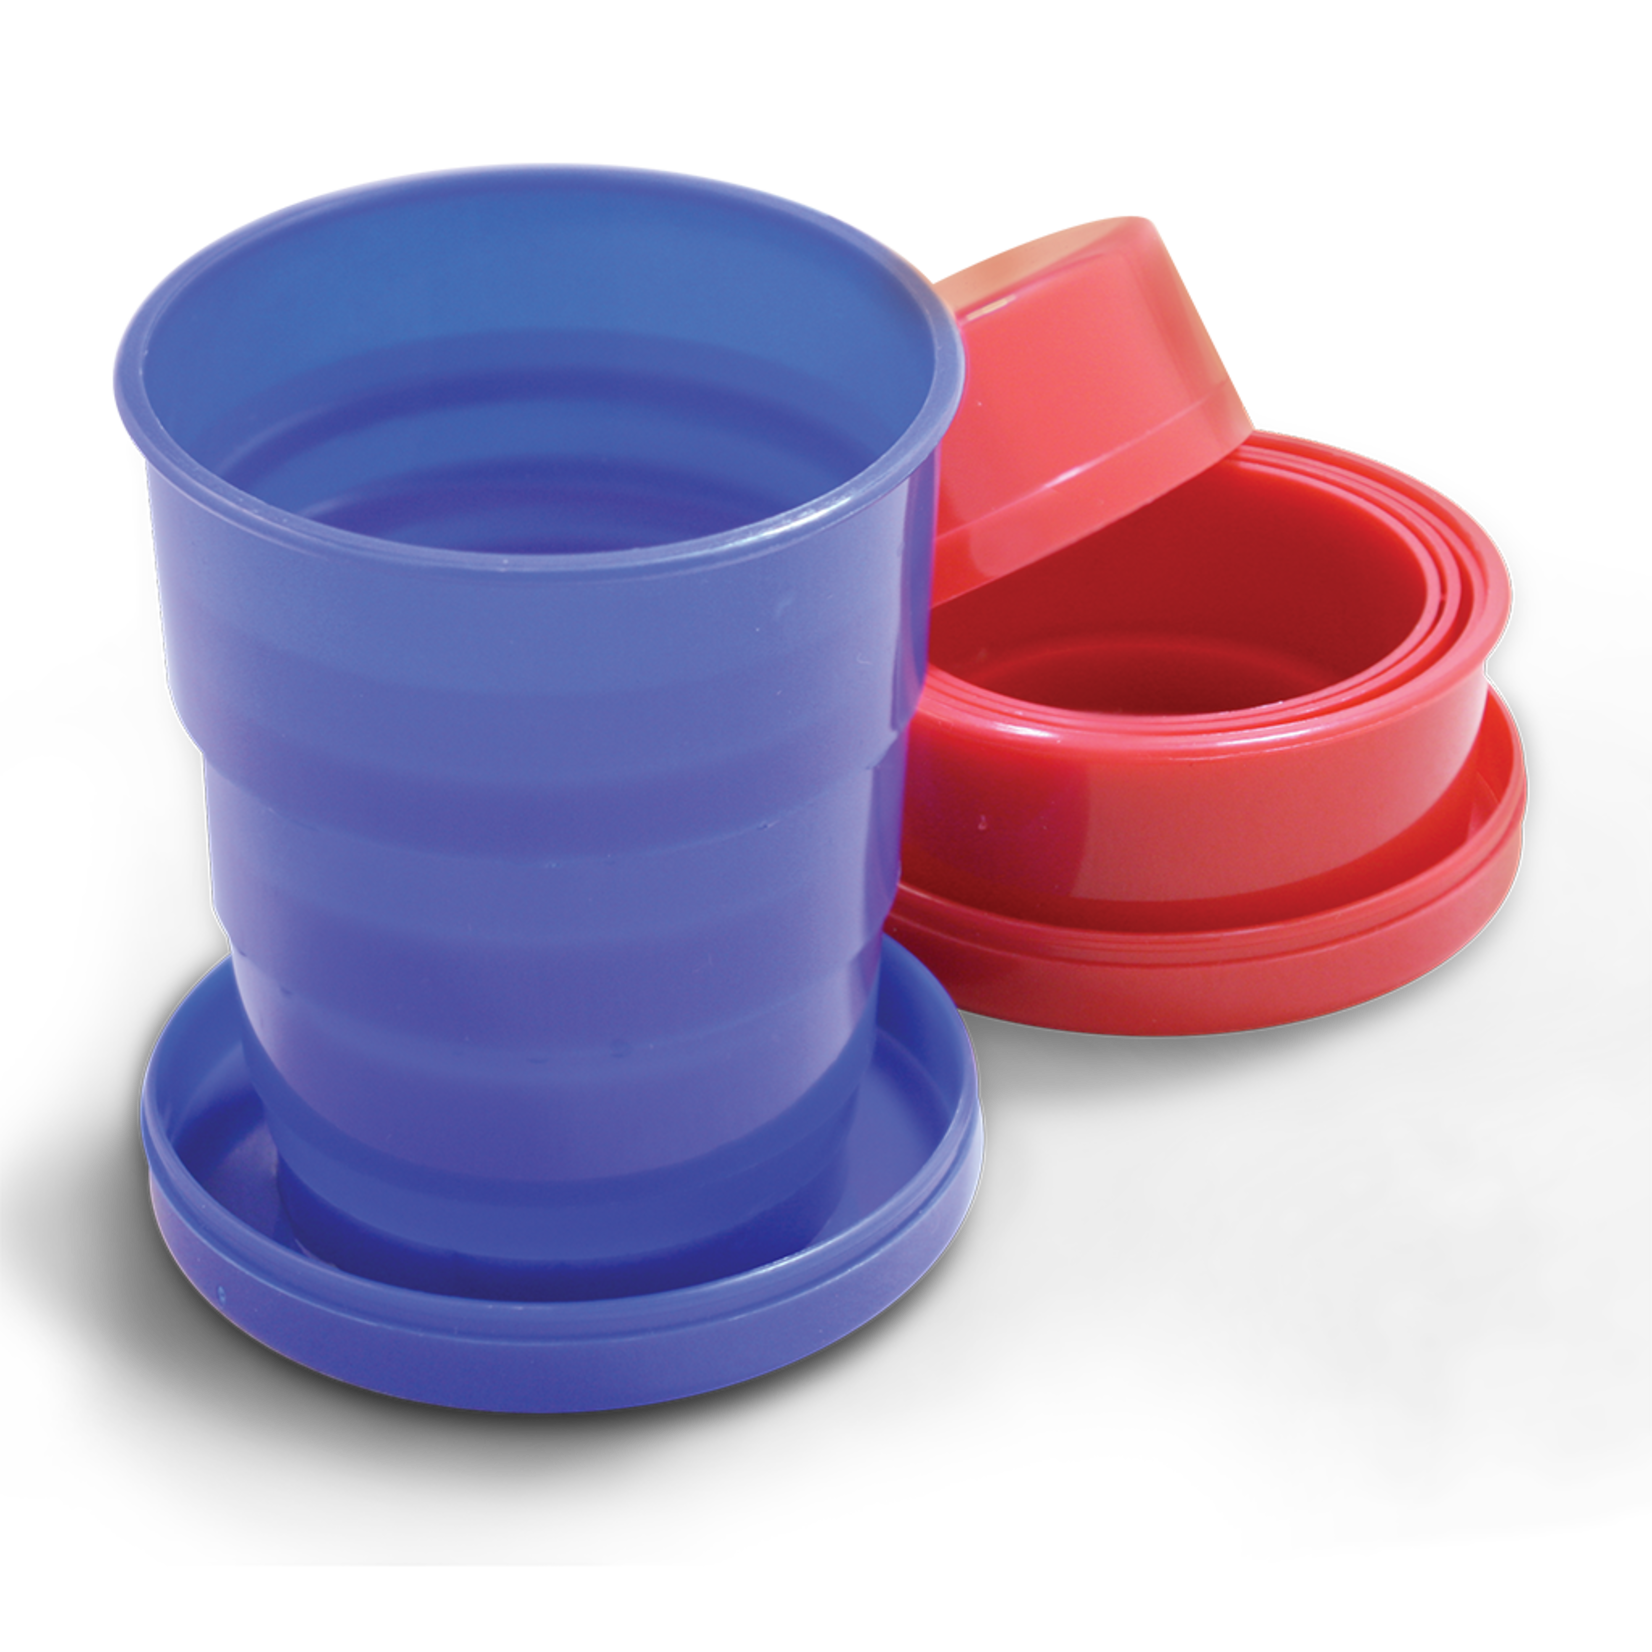 Coghlan's Coghlan's Collapsible Tumblers - 2 Pack